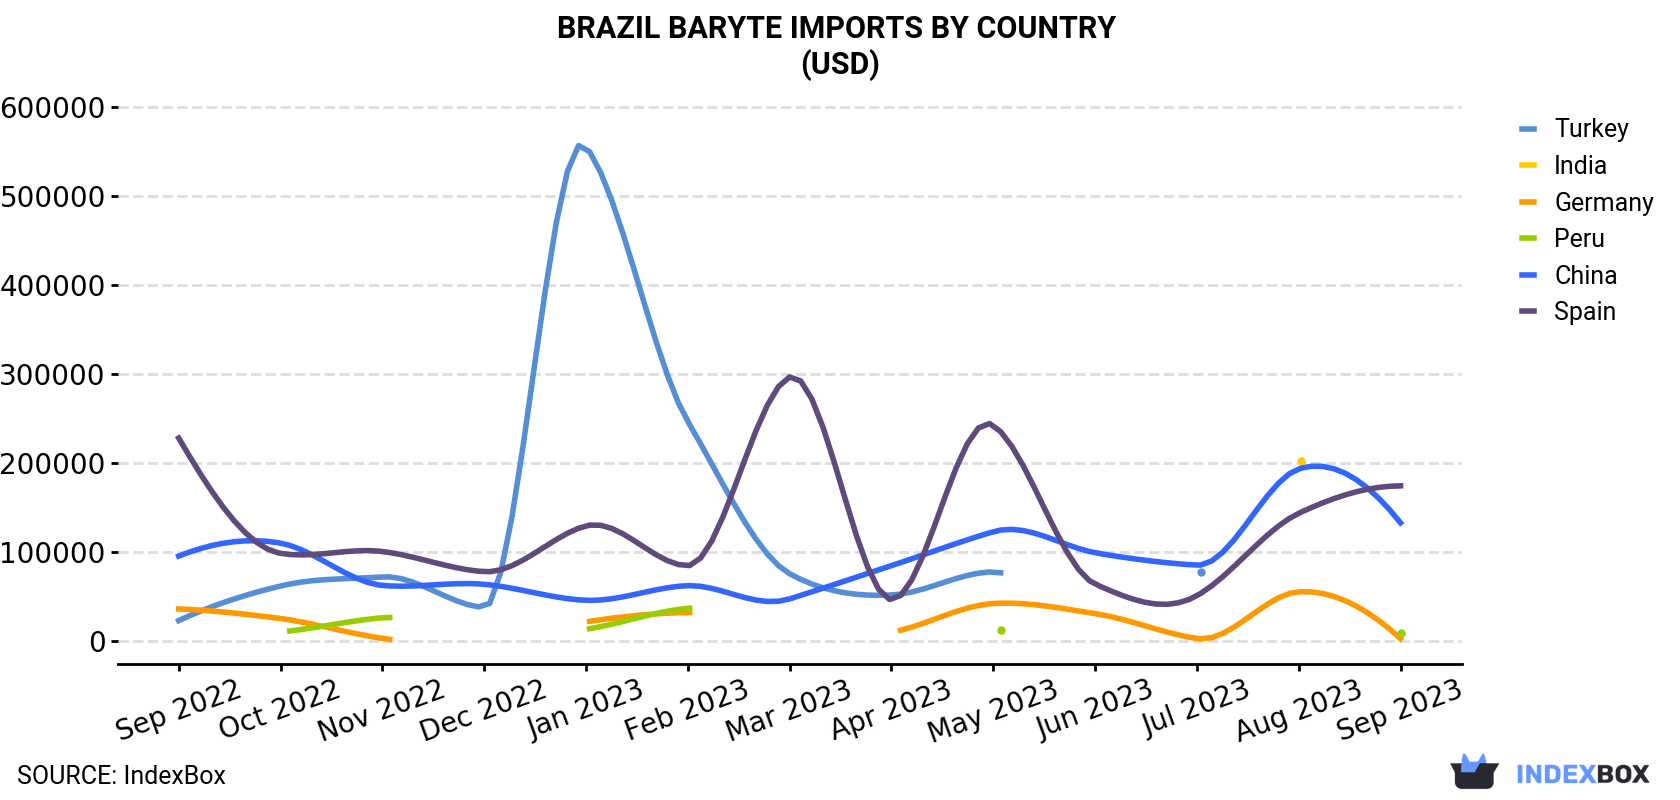 Brazil Baryte Imports By Country (USD)